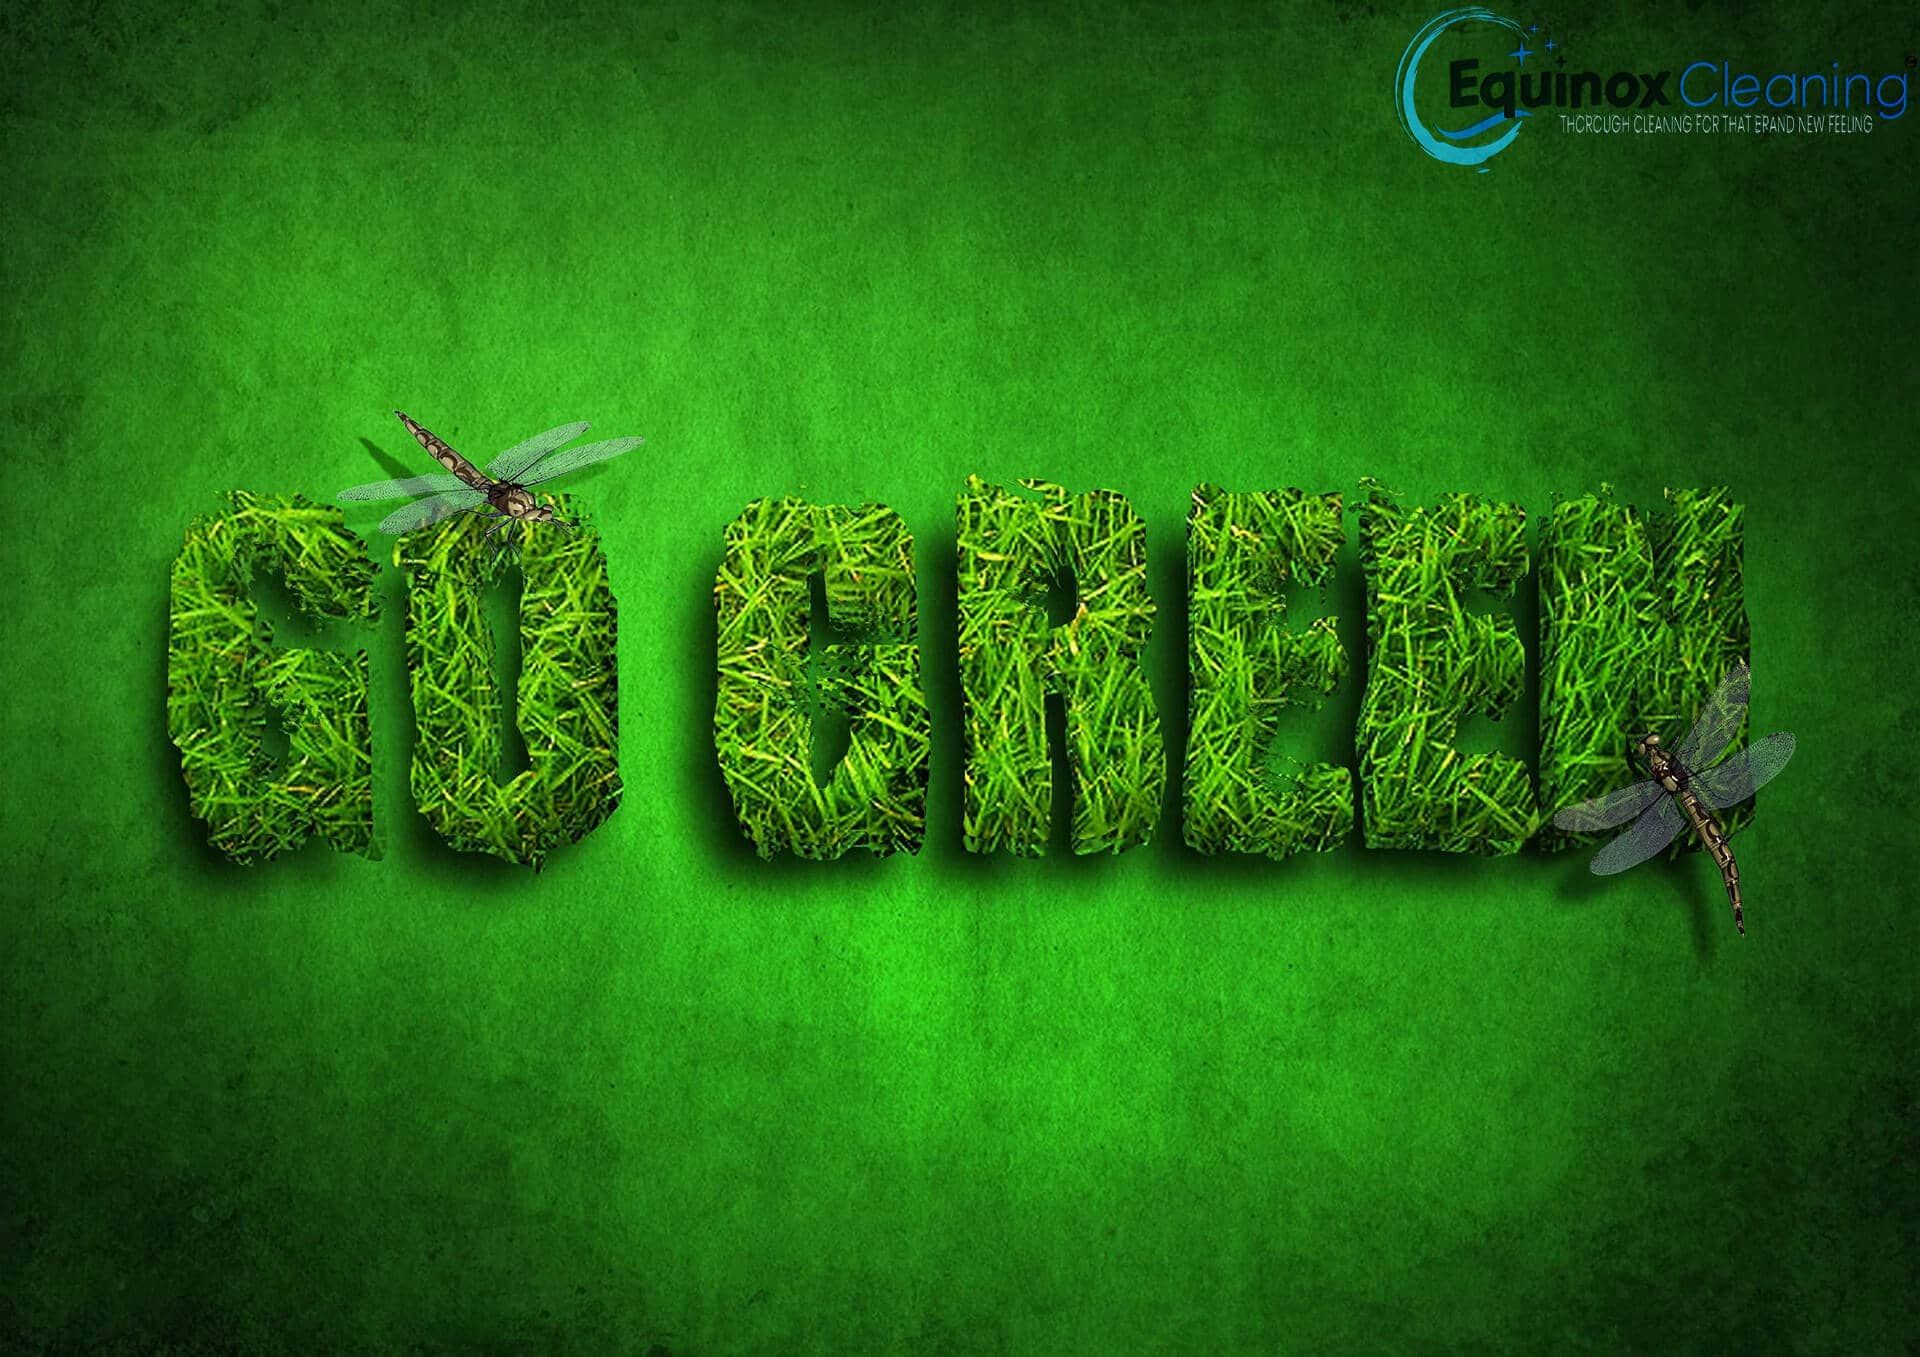 Read more about the article Green Revolution